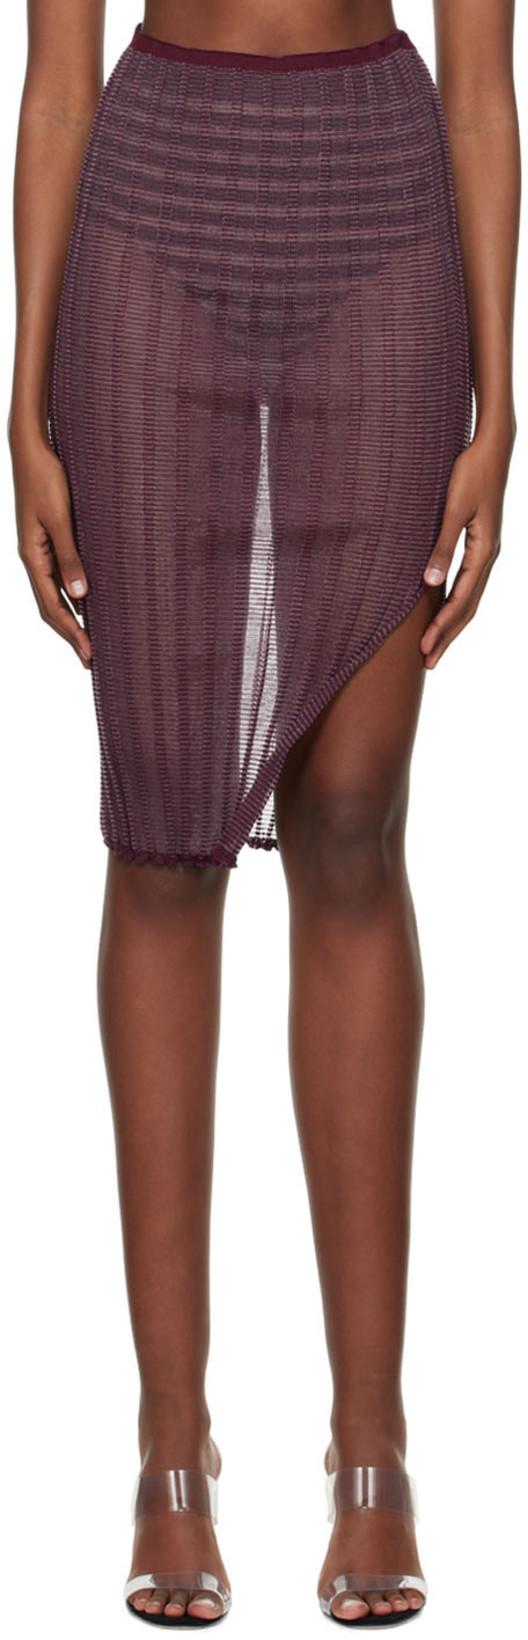 SSENSE Exclusive Burgundy Anais Midi Skirt by A. ROEGE HOVE